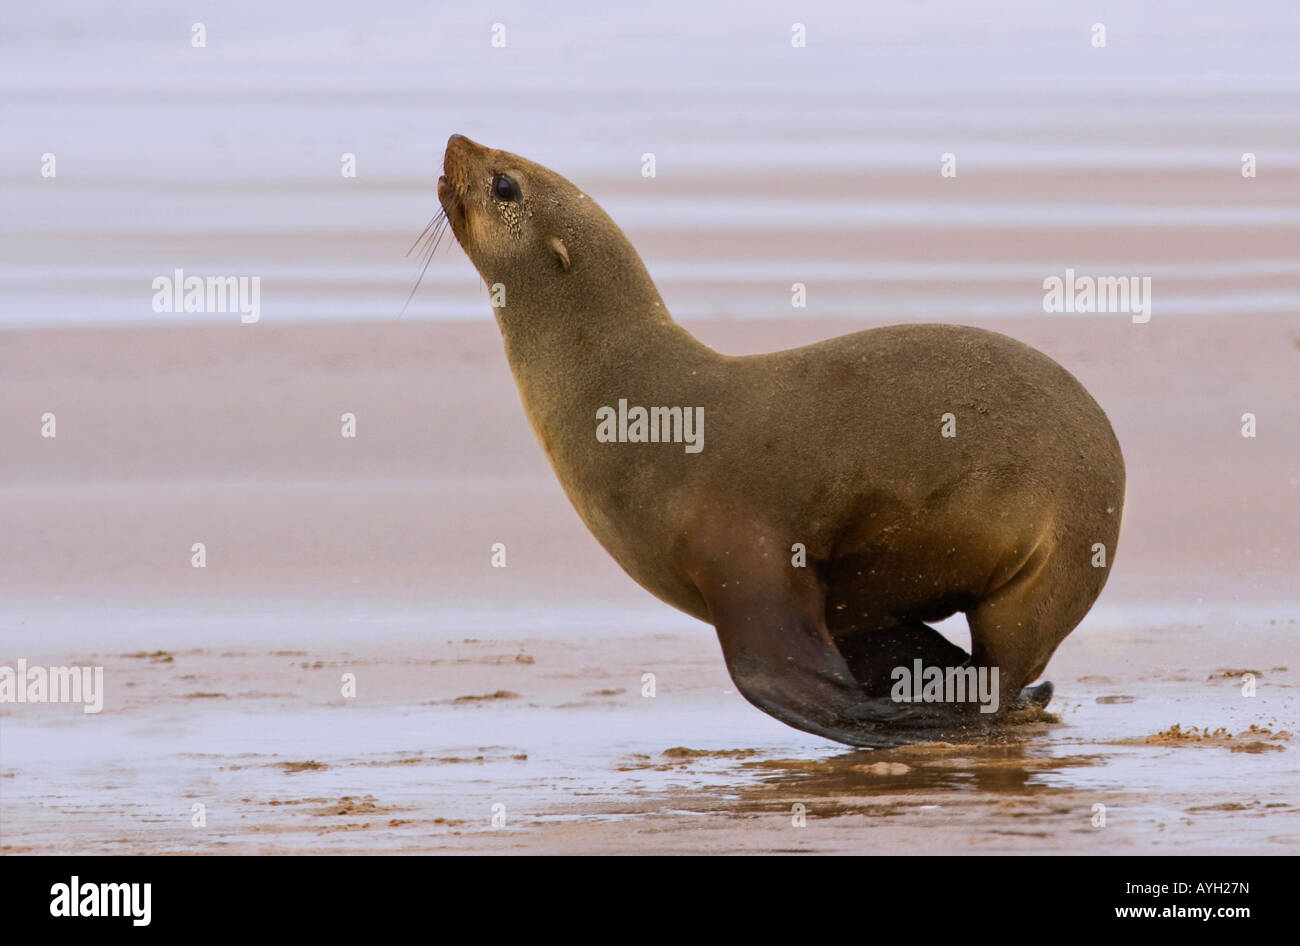 South African Fur Seal on sand, Namibia, Africa Stock Photo